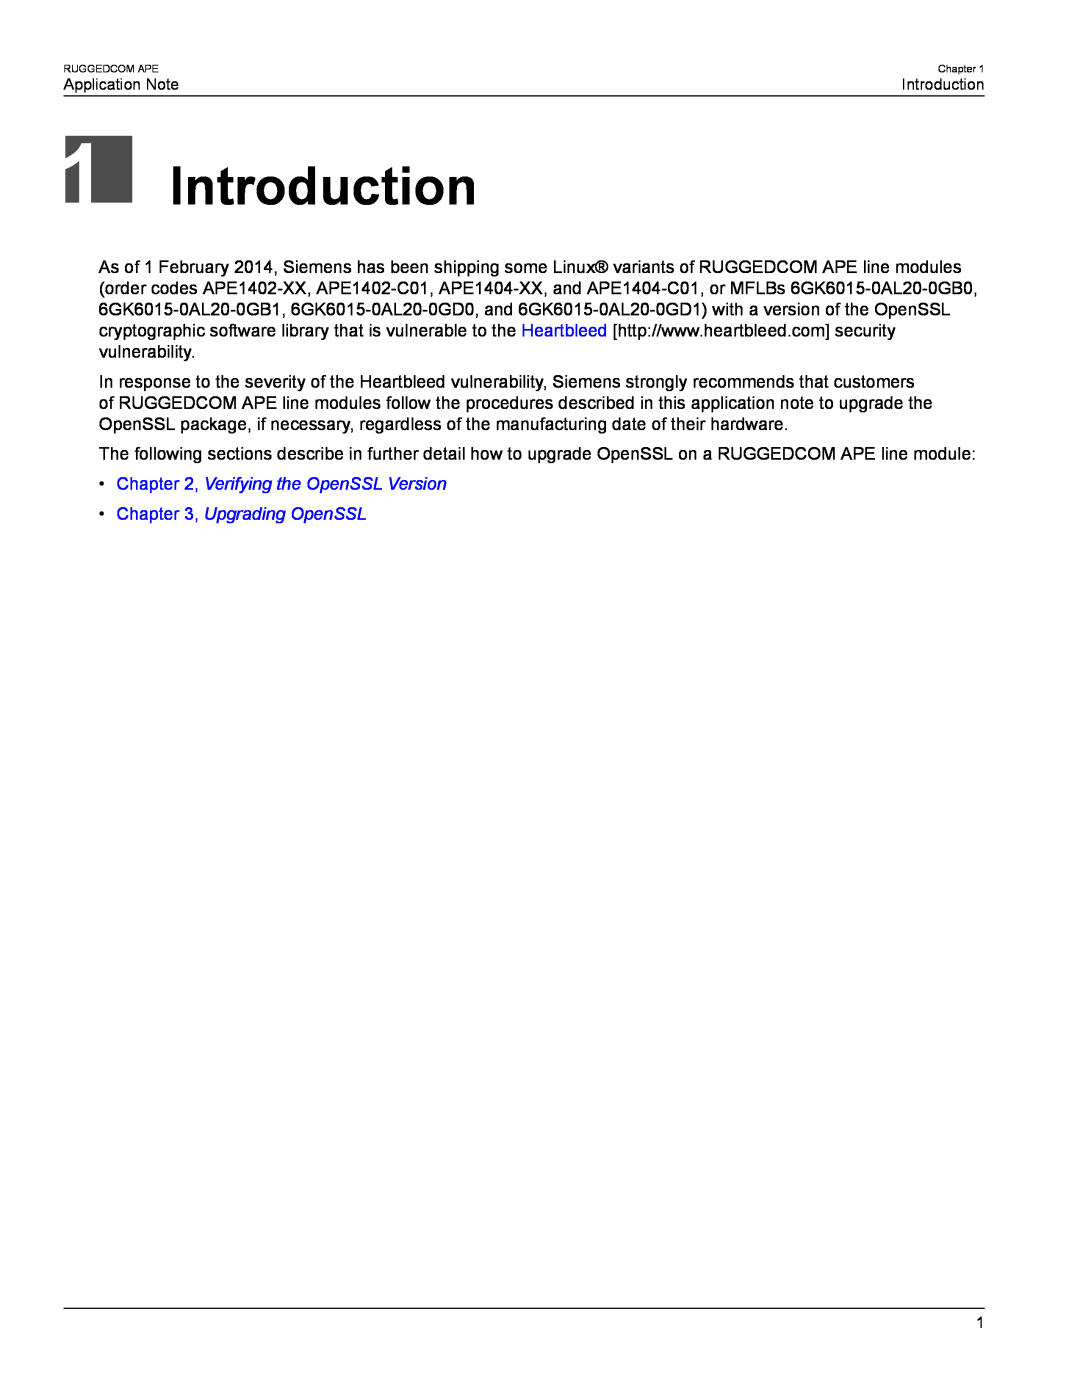 Siemens AN25 manual Introduction, Verifying the OpenSSL Version, Upgrading OpenSSL 